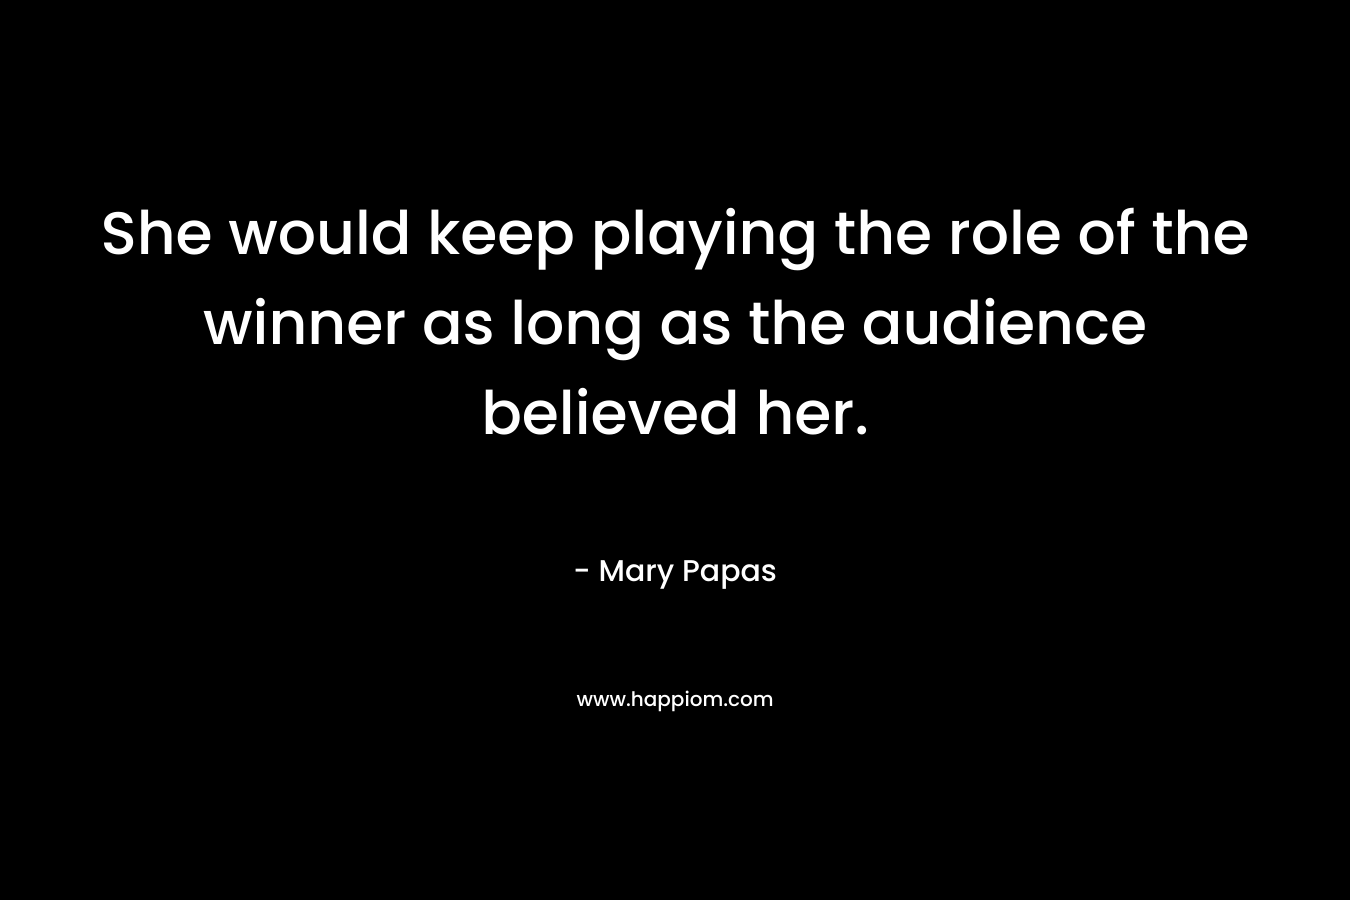 She would keep playing the role of the winner as long as the audience believed her. – Mary Papas